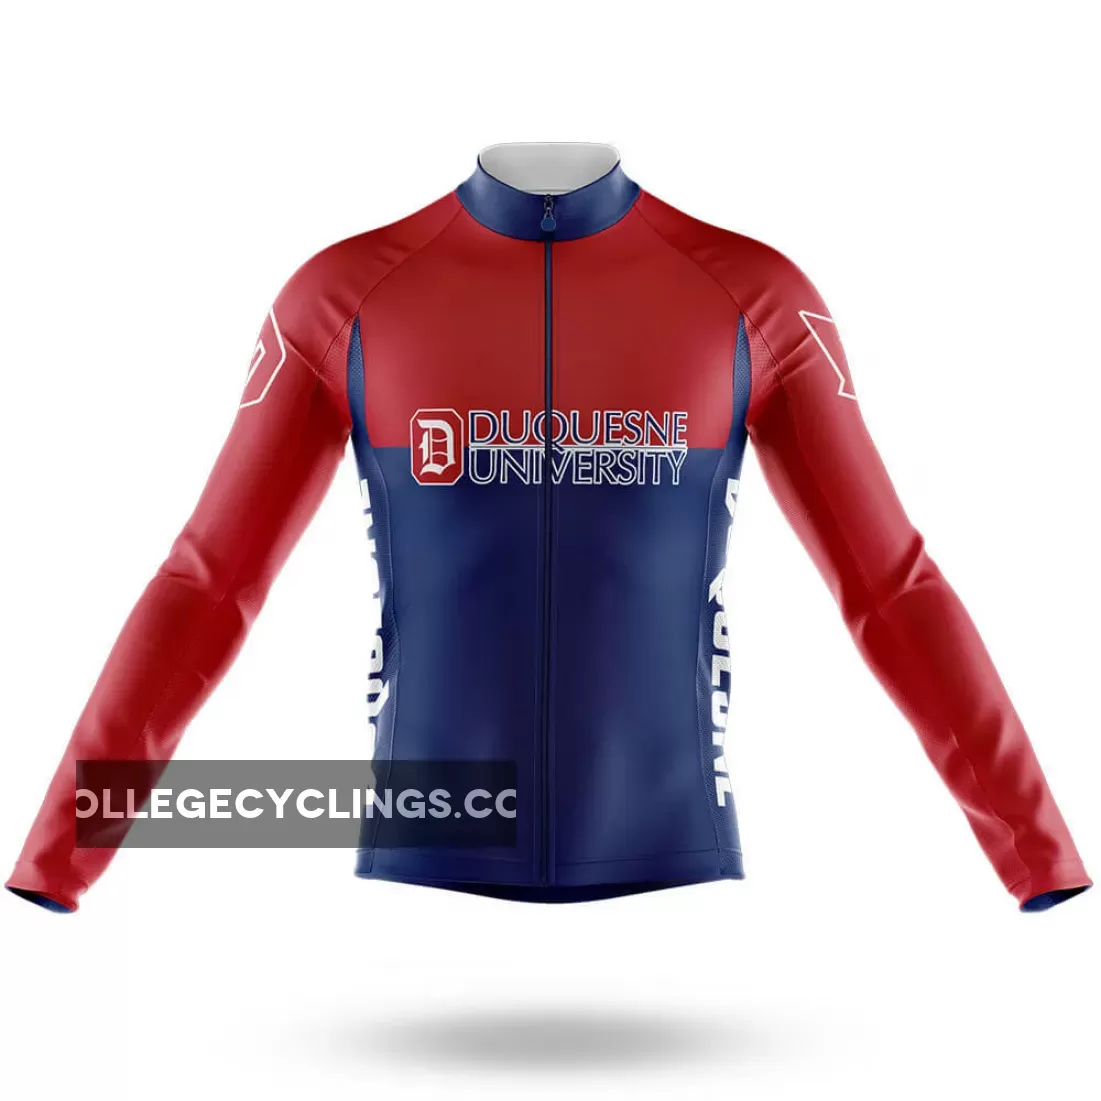 Duquesne University Long Sleeve Cycling Jersey Ver.2